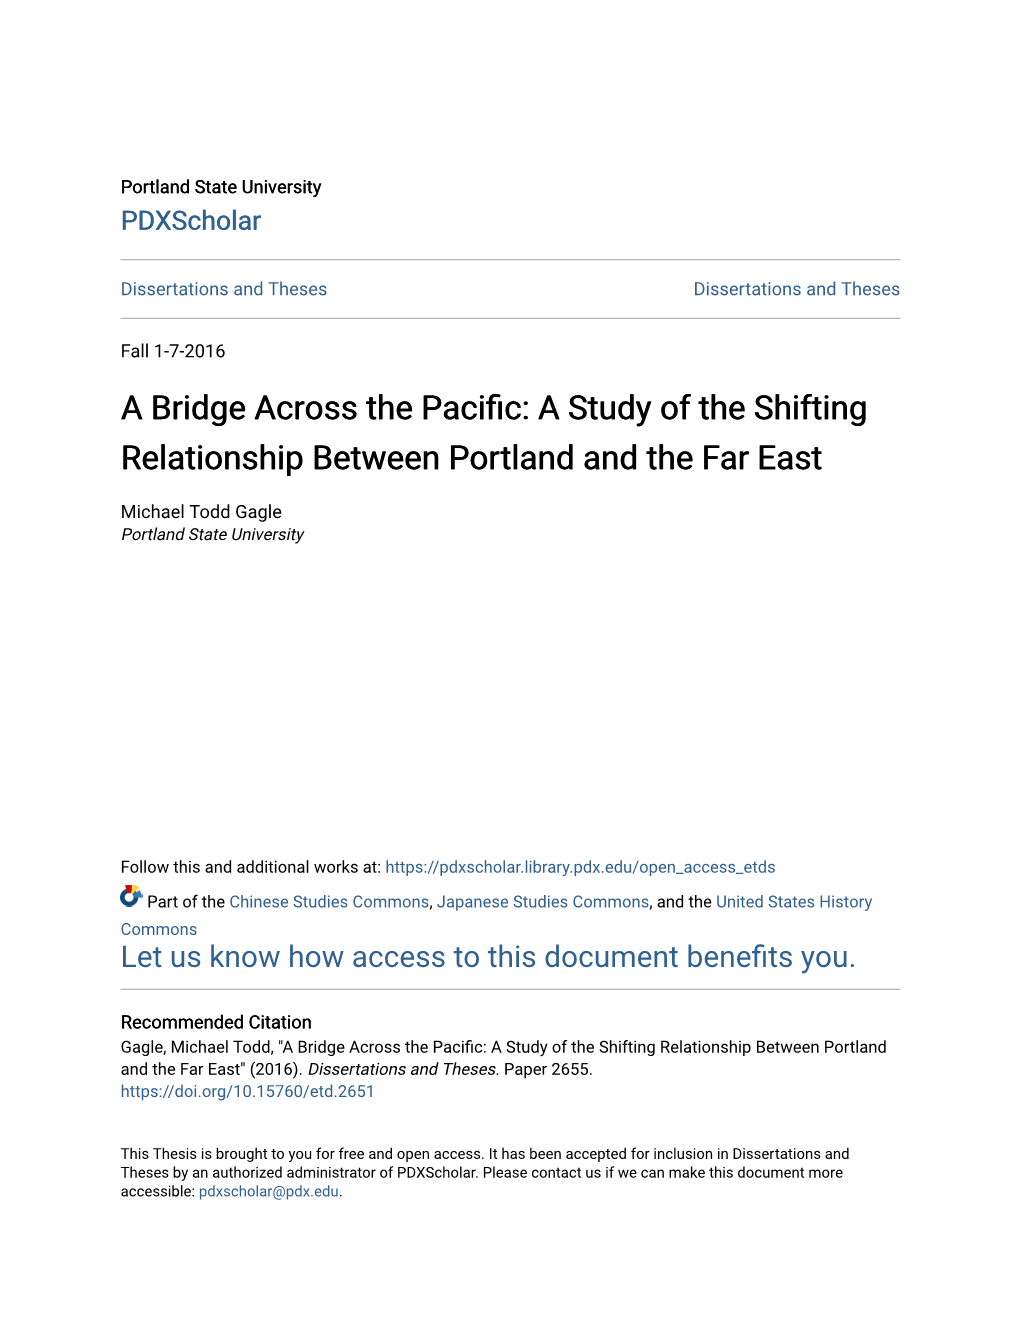 A Bridge Across the Pacific: a Study of the Shifting Relationship Between Portland and the Far East